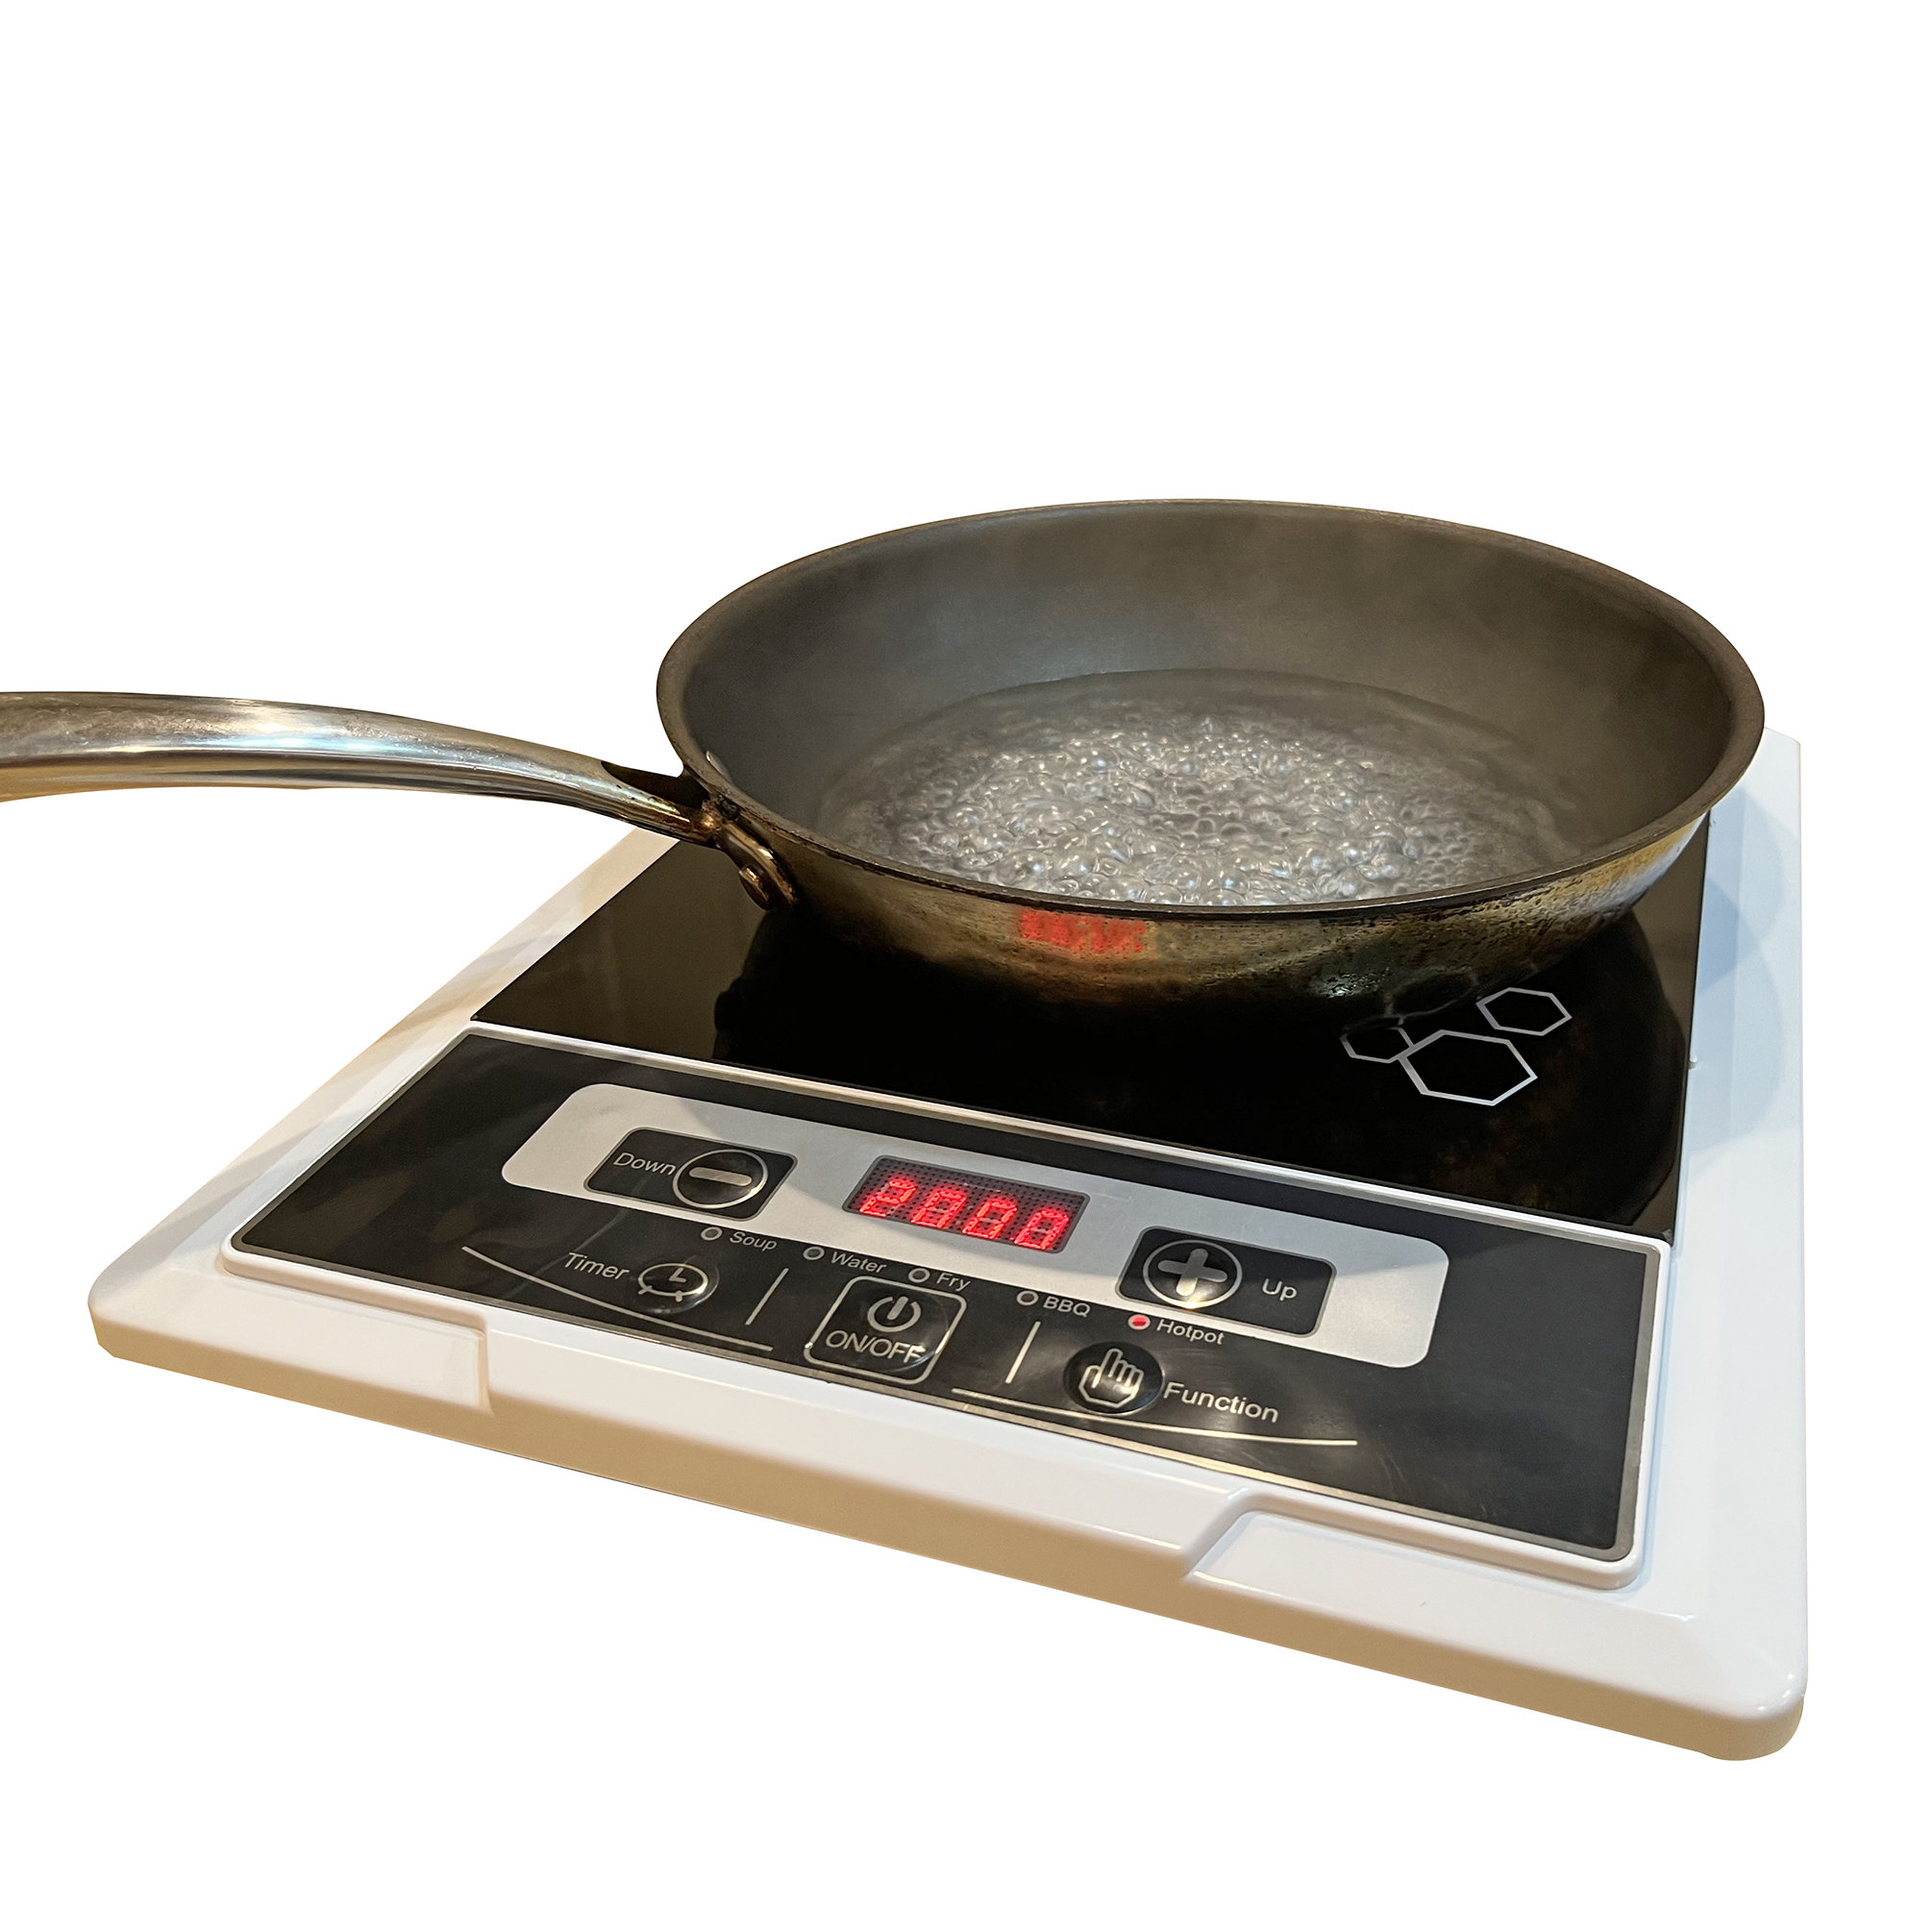 What is the Difference Between Hotplate and Induction Cooker